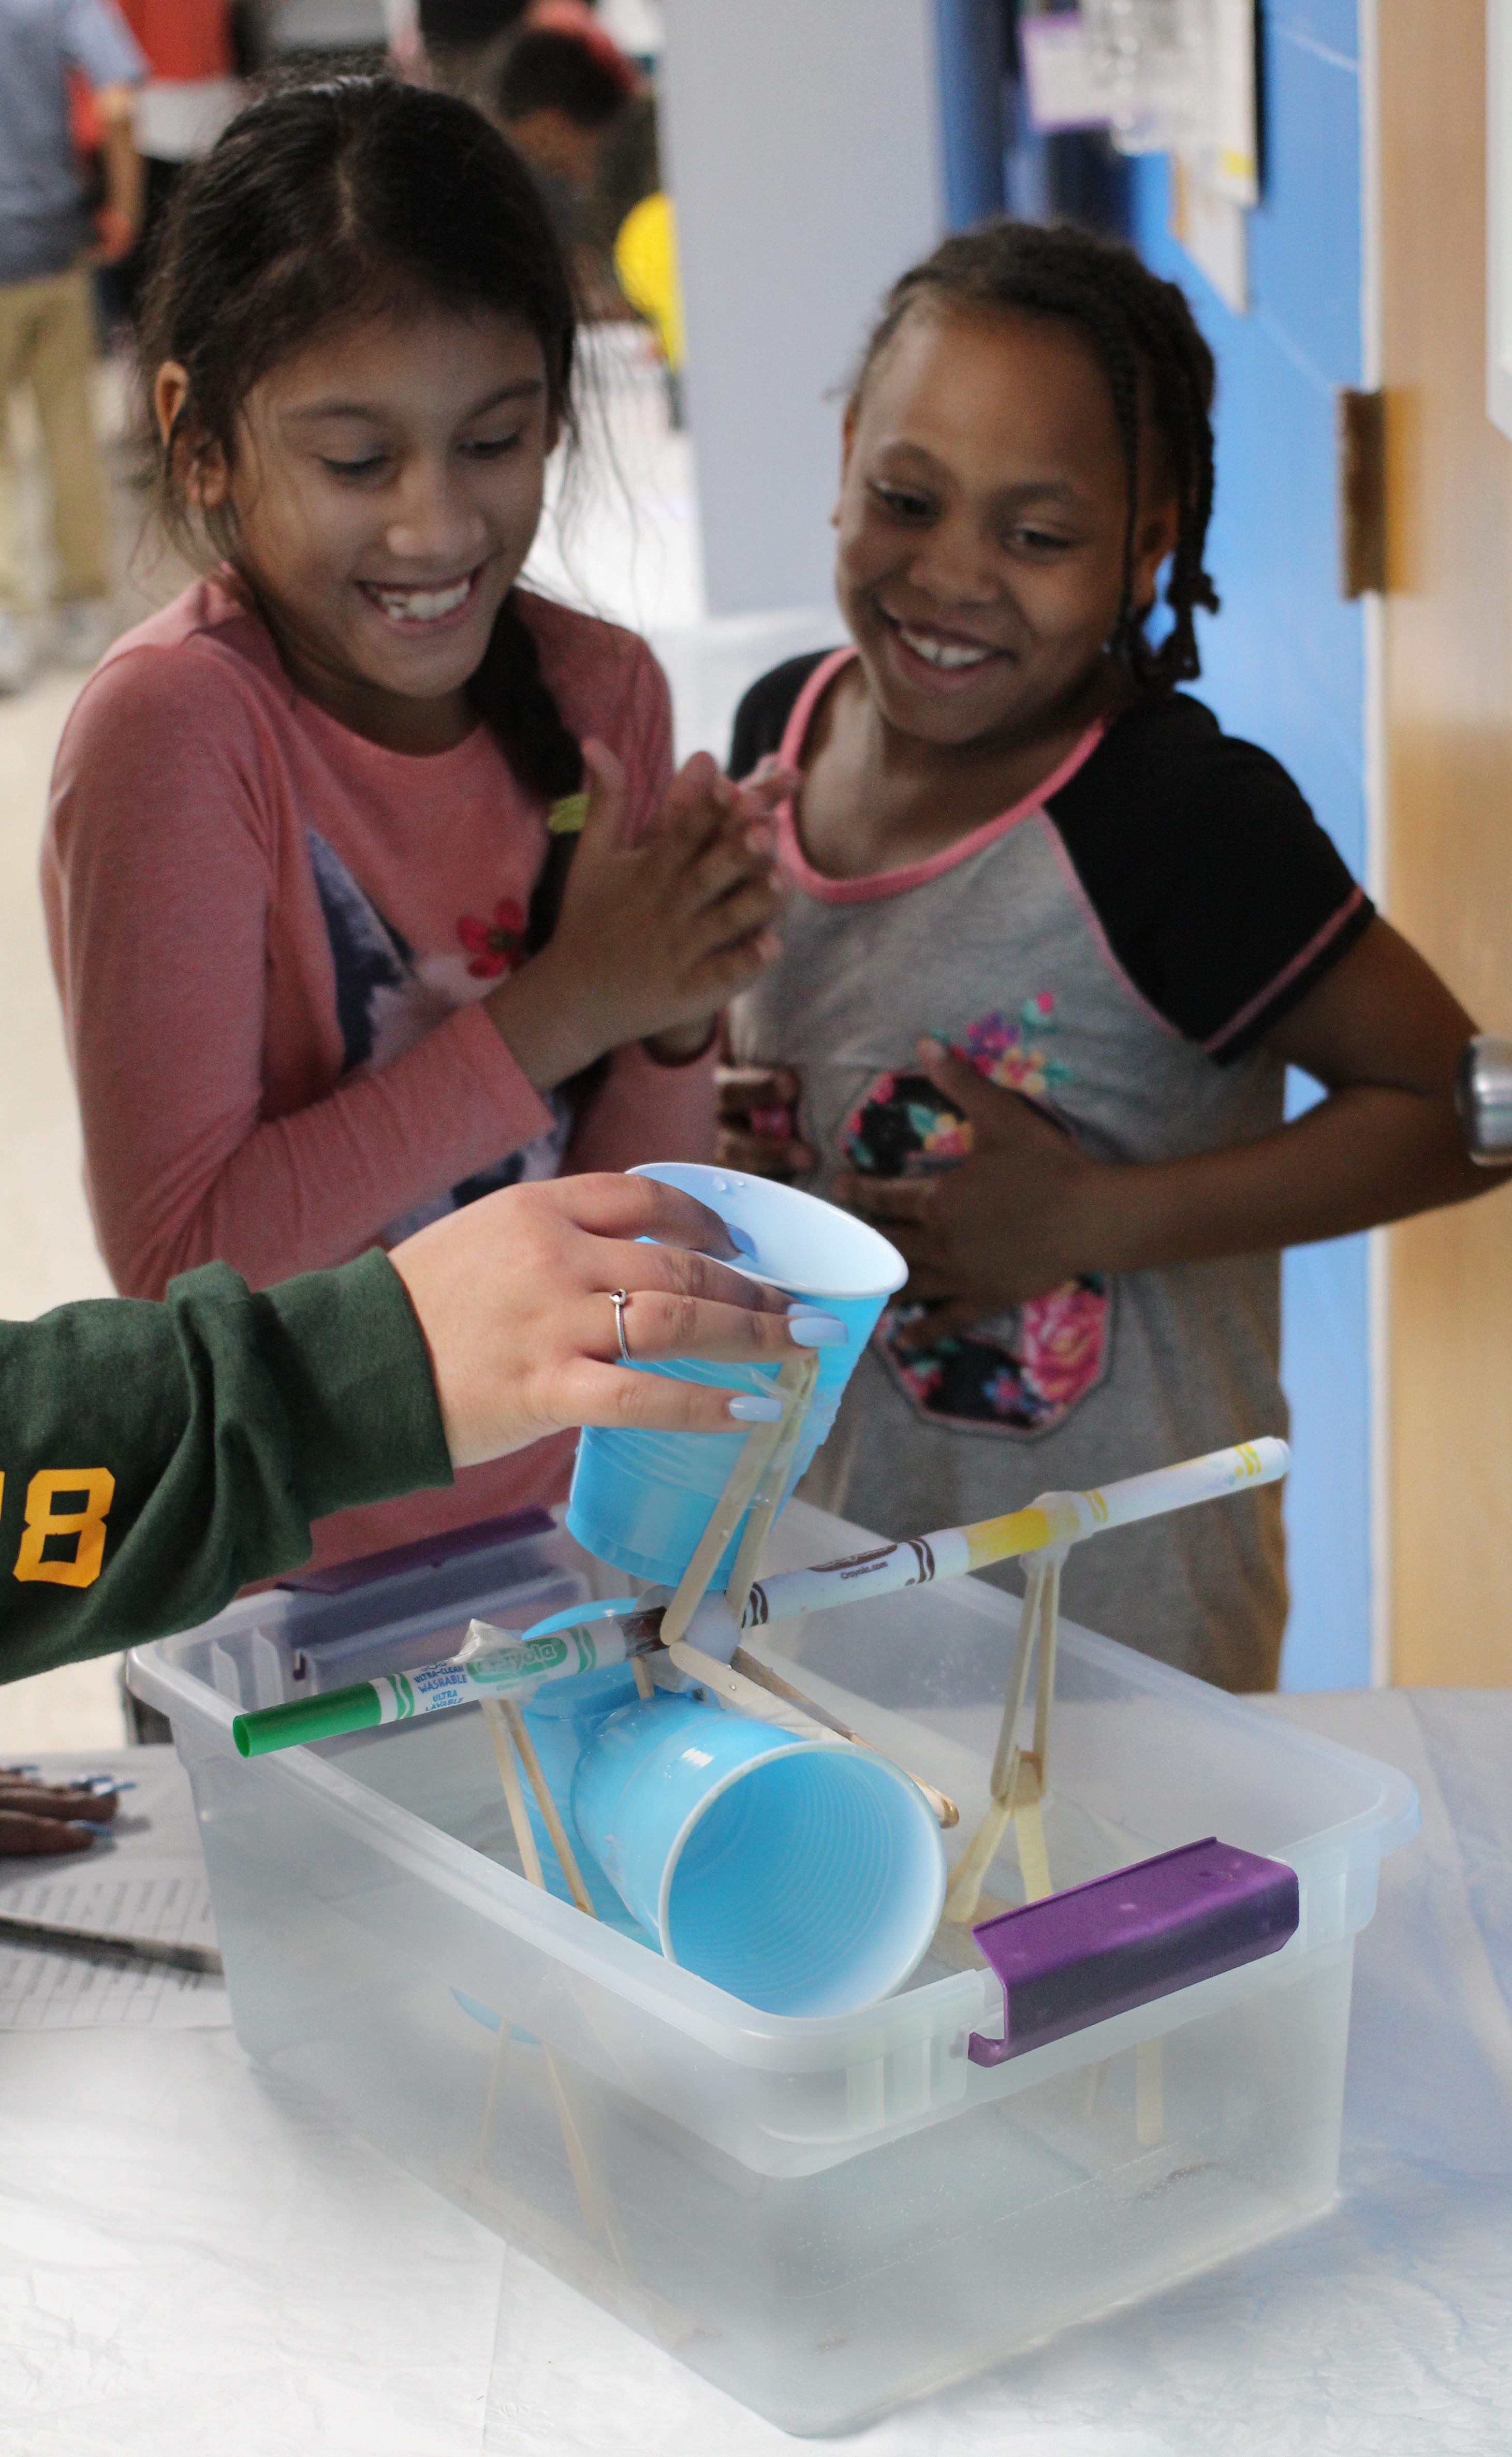 Lynn, Ma. 4-26-18. Aaliyah Grullard, left, and Kayla Corley, right with their science project Ancient Civilization water wheel at the science fair held at the Lynn YMCA.